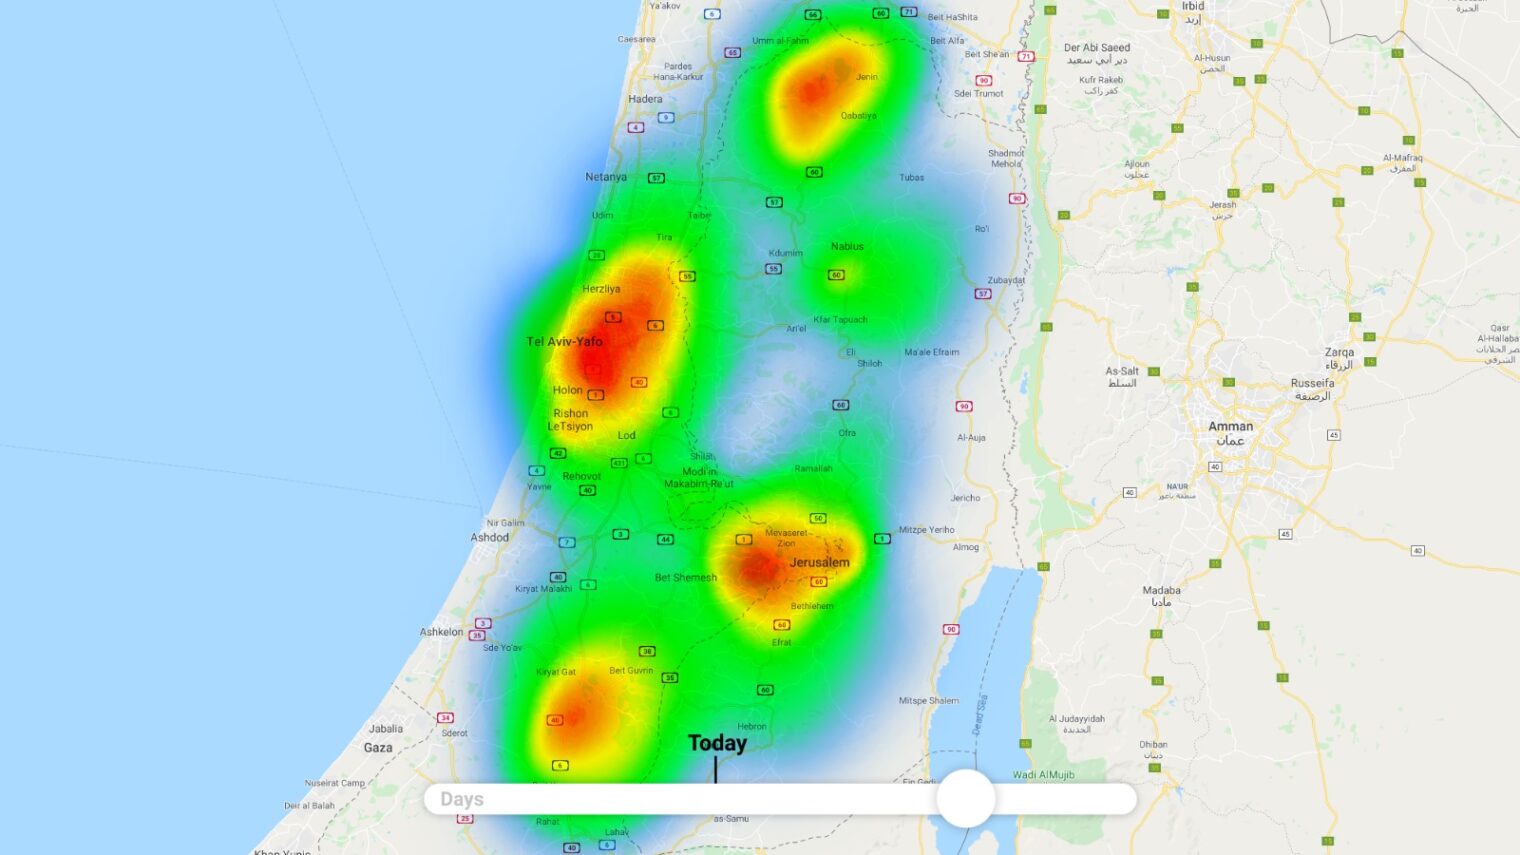 A heat map showing areas of Israel most affected by Covid-19 on April 13, 2019. Image courtesy of Diagnostic Robotics